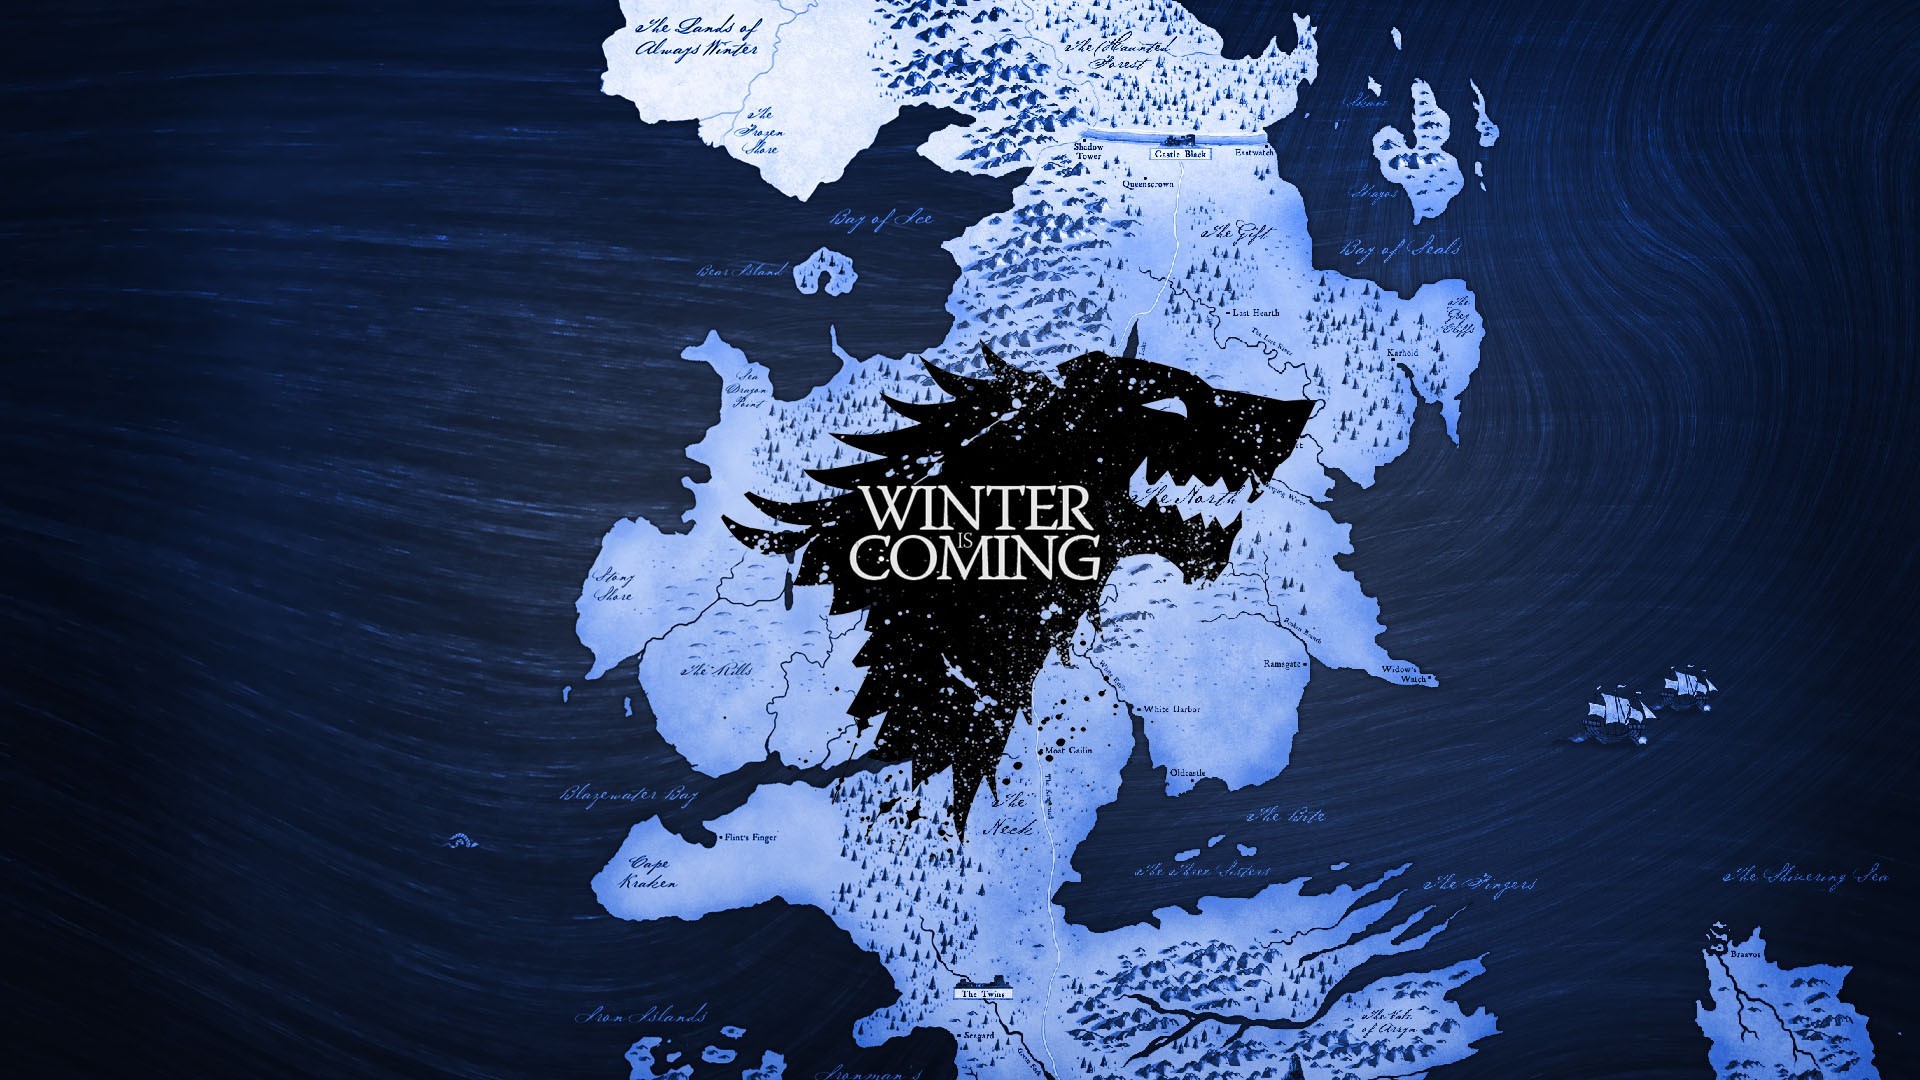 Game Of Thrones, Map, Westeros, Winterfell, A Song Of Ice And Fire, House Stark, Winter Is Coming, Wolf Wallpaper